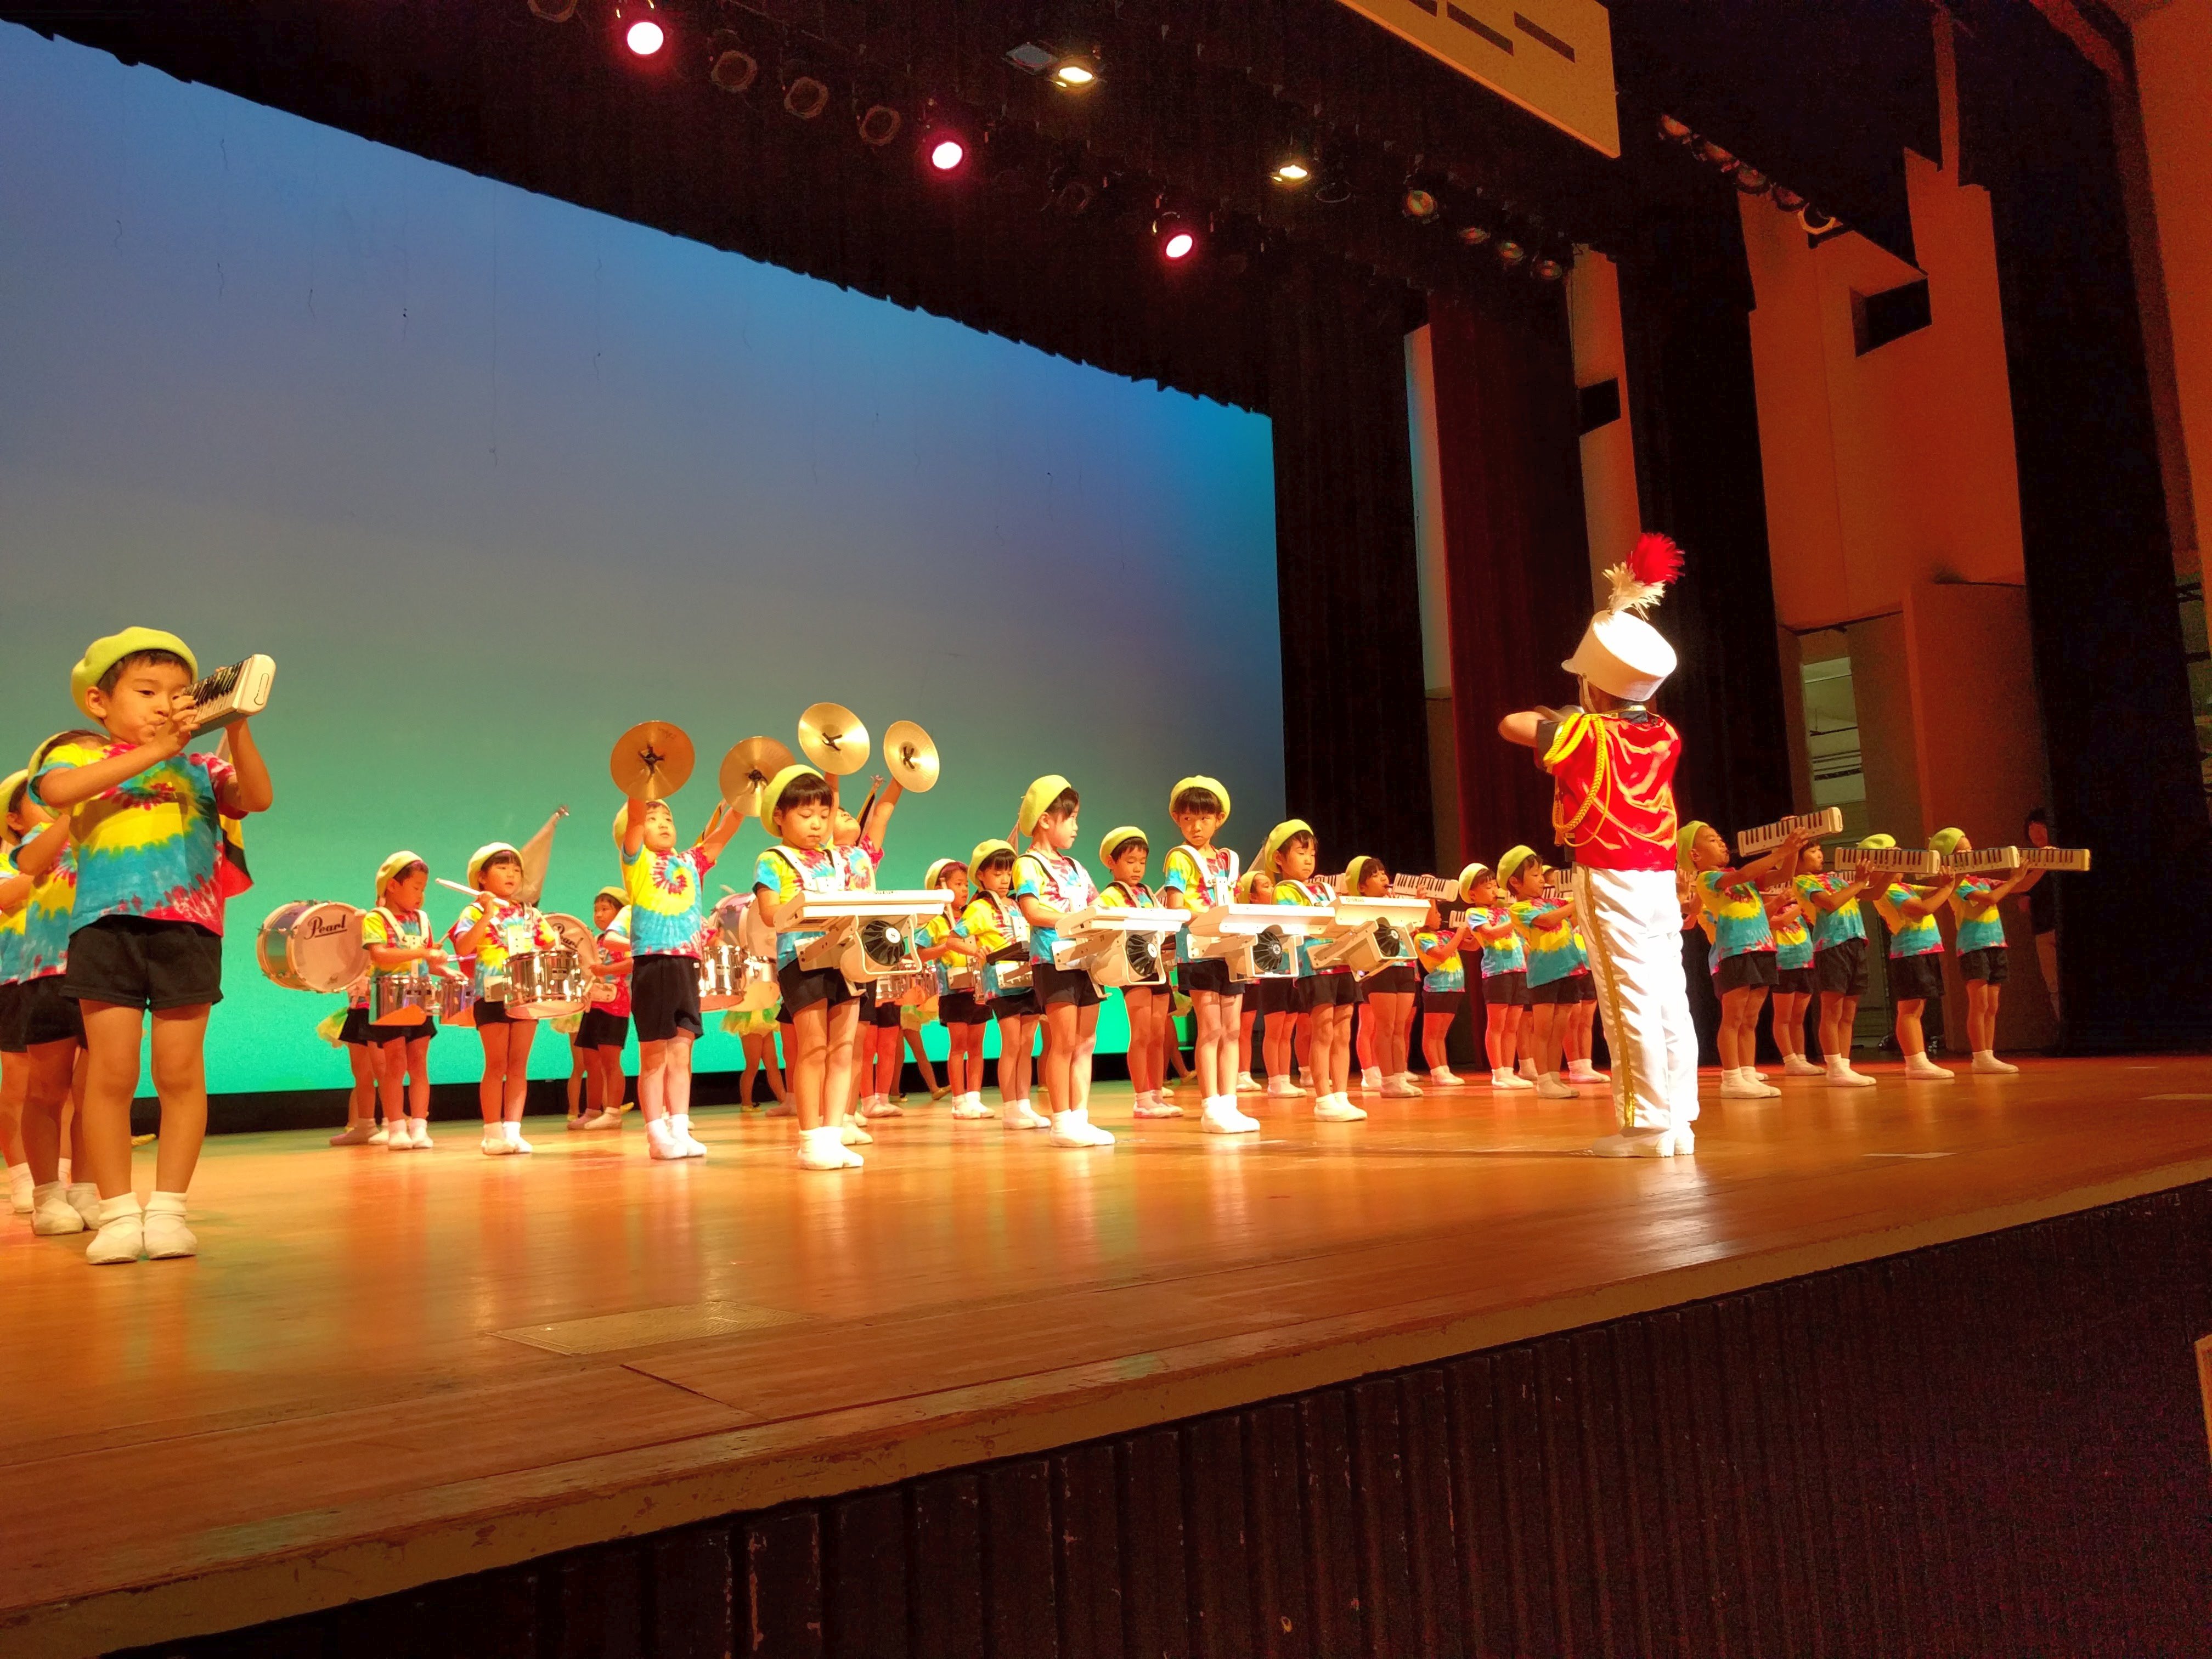 The primary school kids of Komatsu perform an orchestra song to welcome the Japan TENT participants.